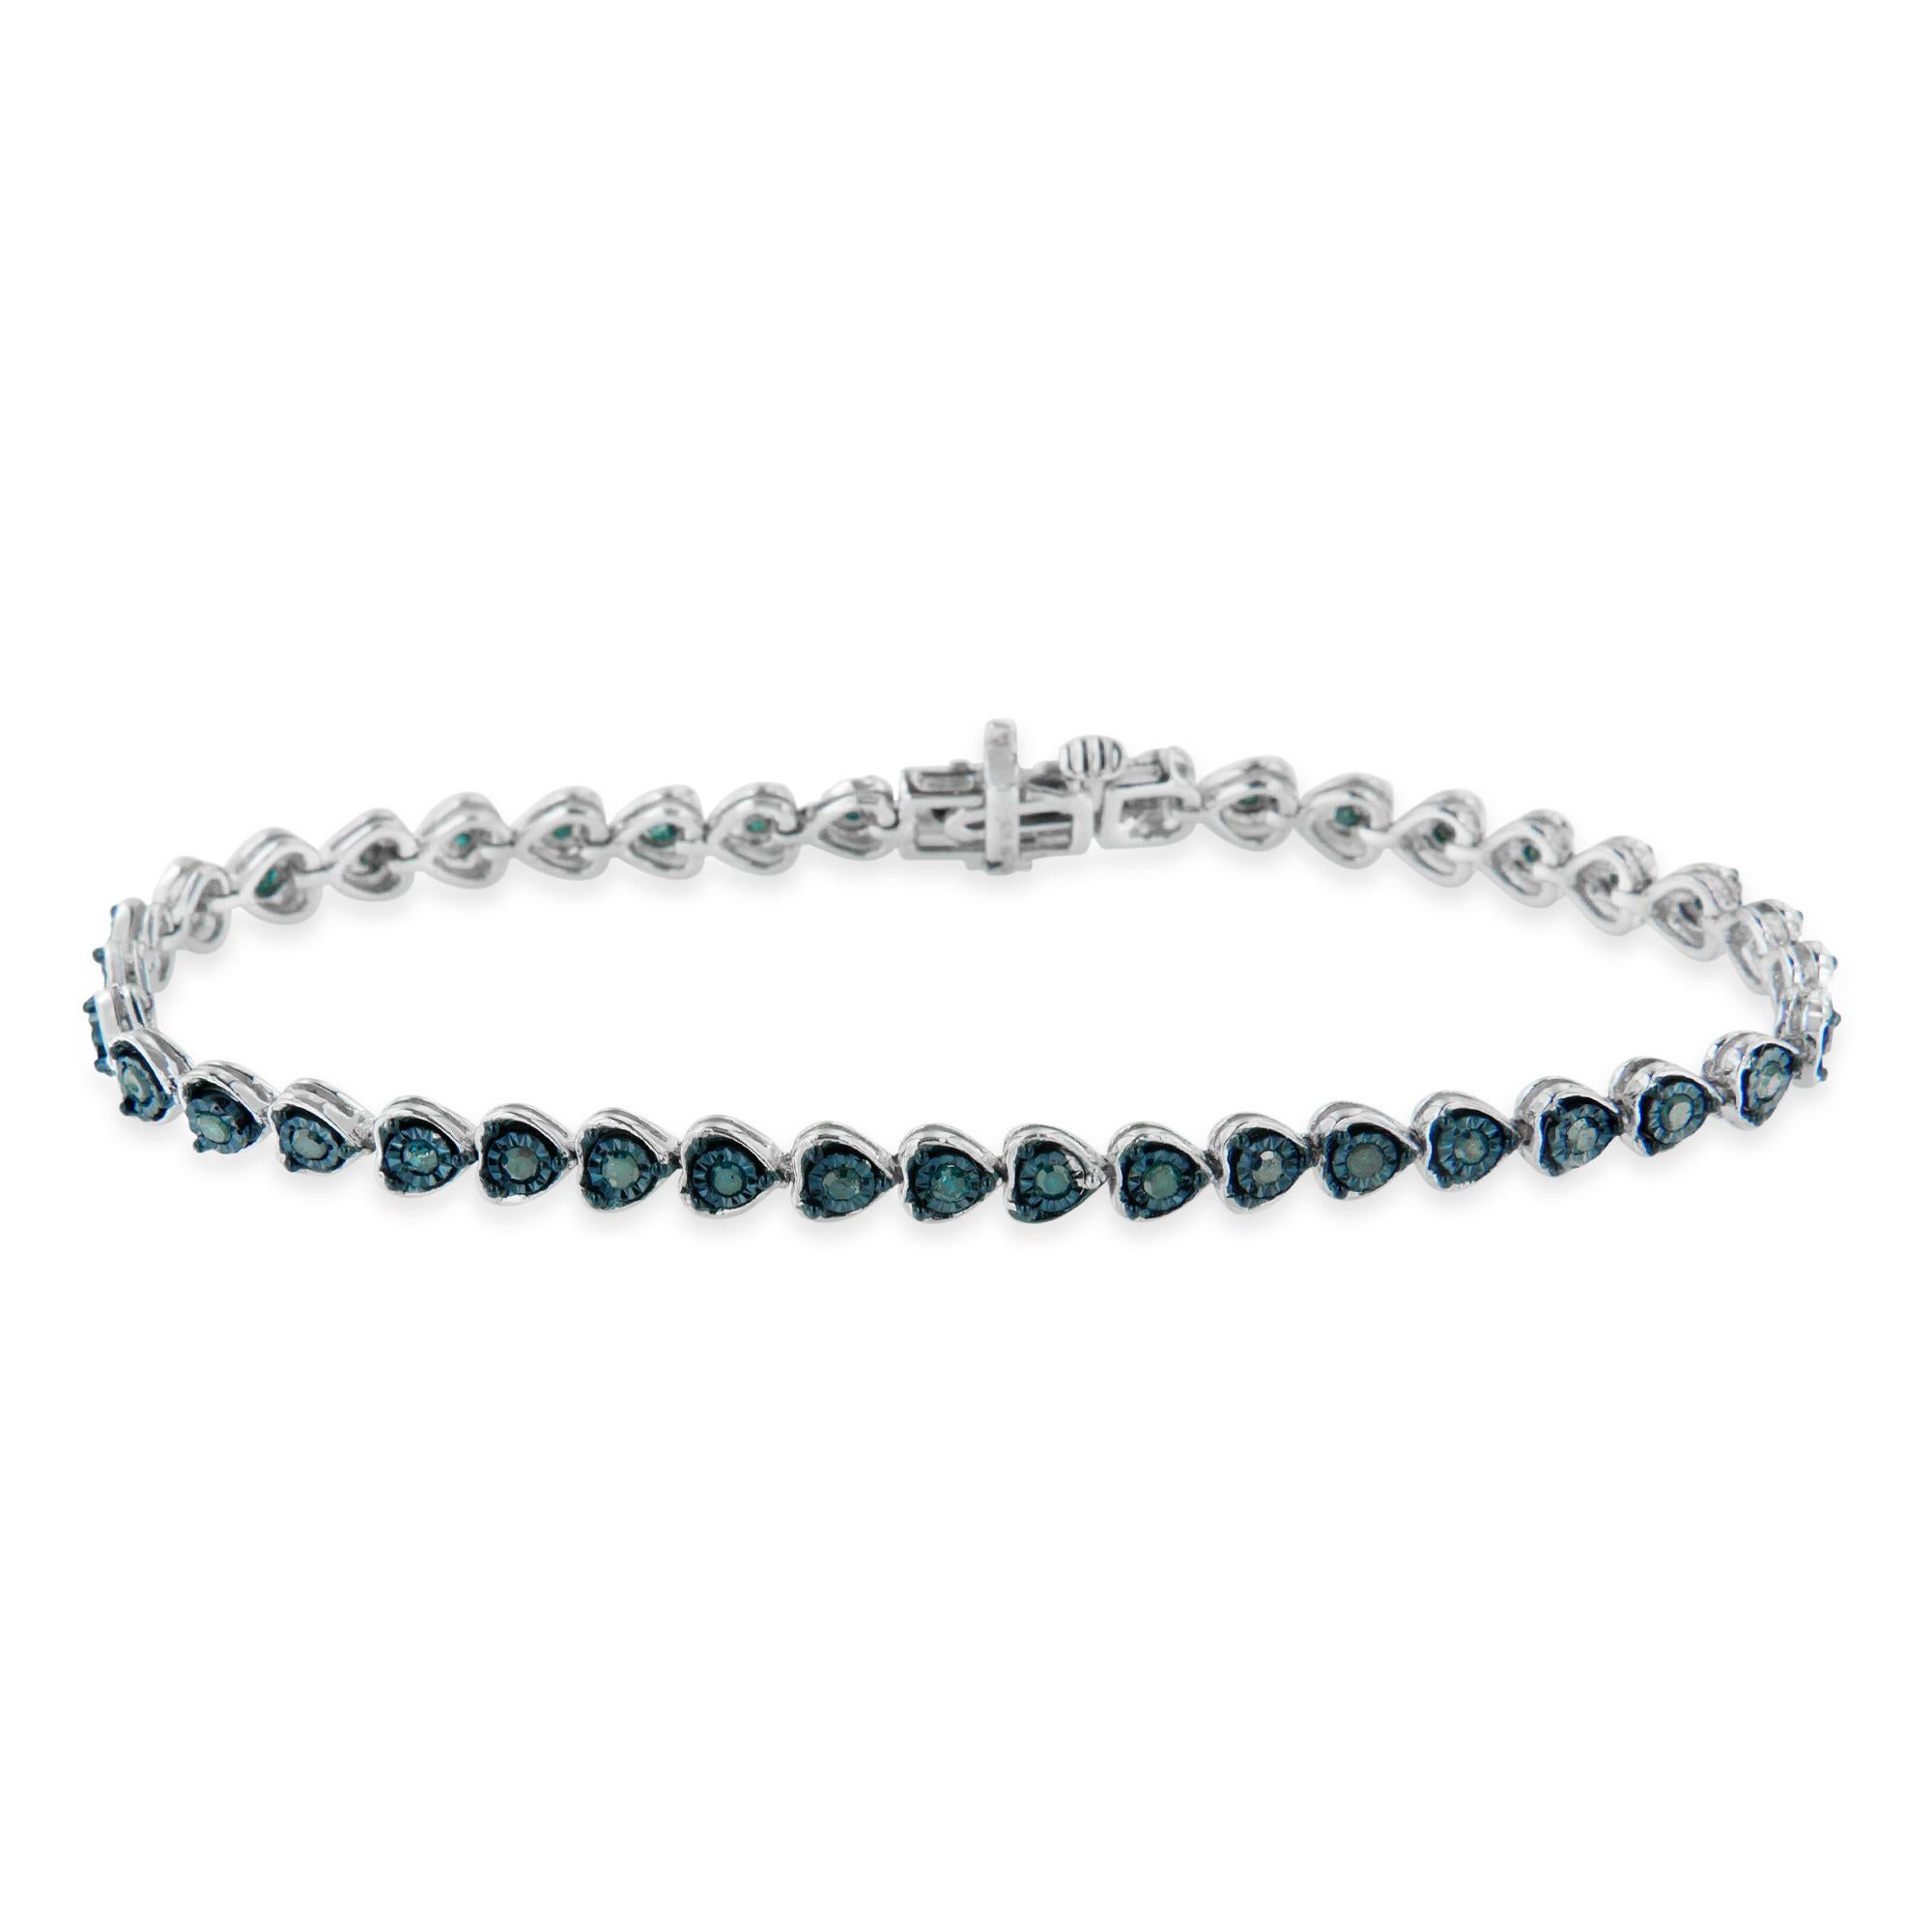 Create your signature look by wearing this elegant diamond tennis link bracelet. Featuring a seamless row of heart accents, adorned with treated blue diamonds and set in a sterling silver framing this bracelet has a classy appearance. Subtle yet